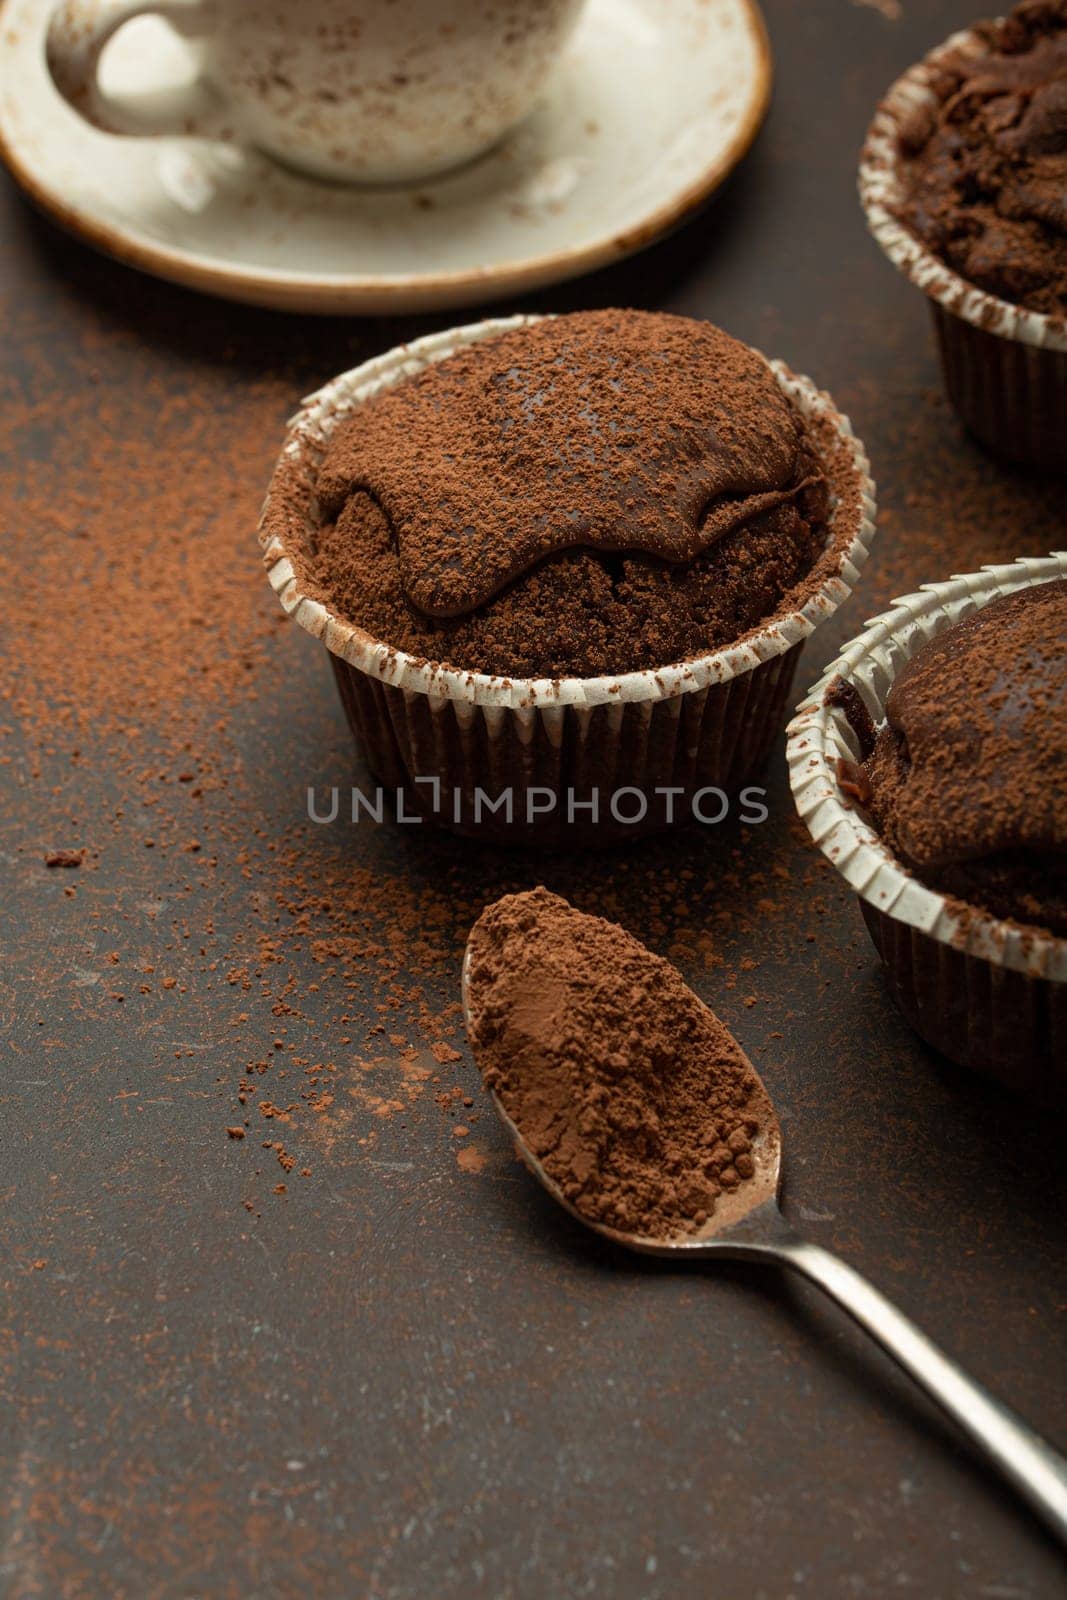 Chocolate and cocoa browny muffins with coffee cappuccino in cup angle view on brown rustic stone background, sweet homemade dark chocolate cupcakes by its_al_dente